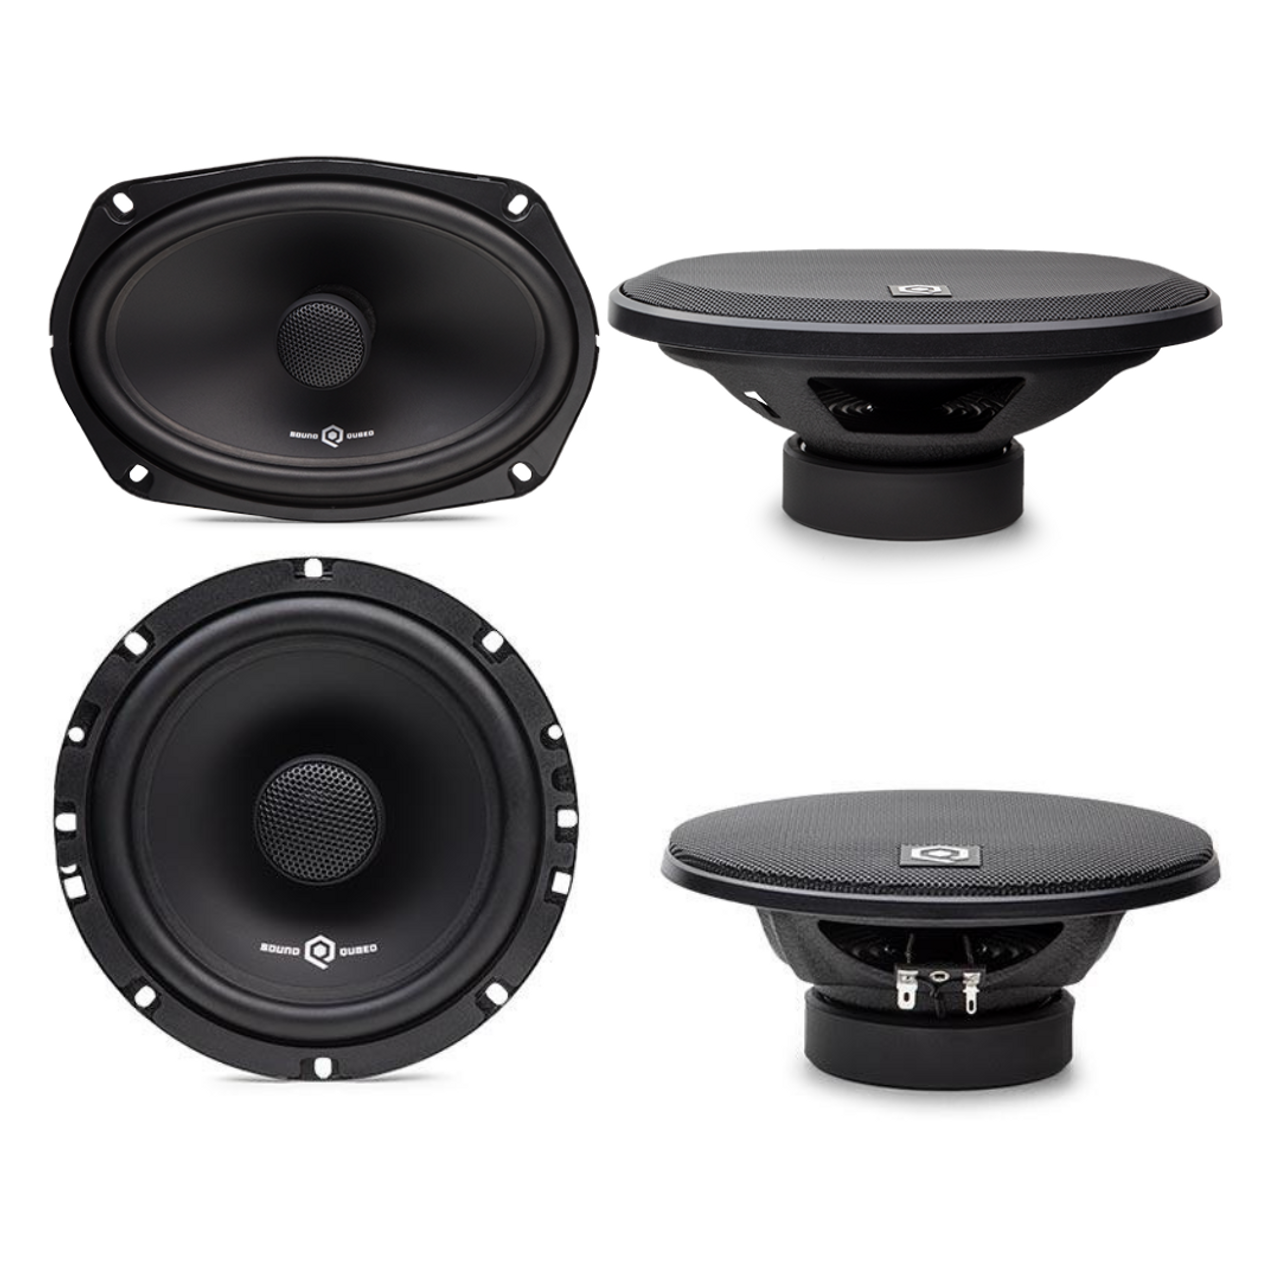 Melodrama Tijdig Kaal Bundle Pack - 6.5" and 6x9" Coaxial Speaker Set